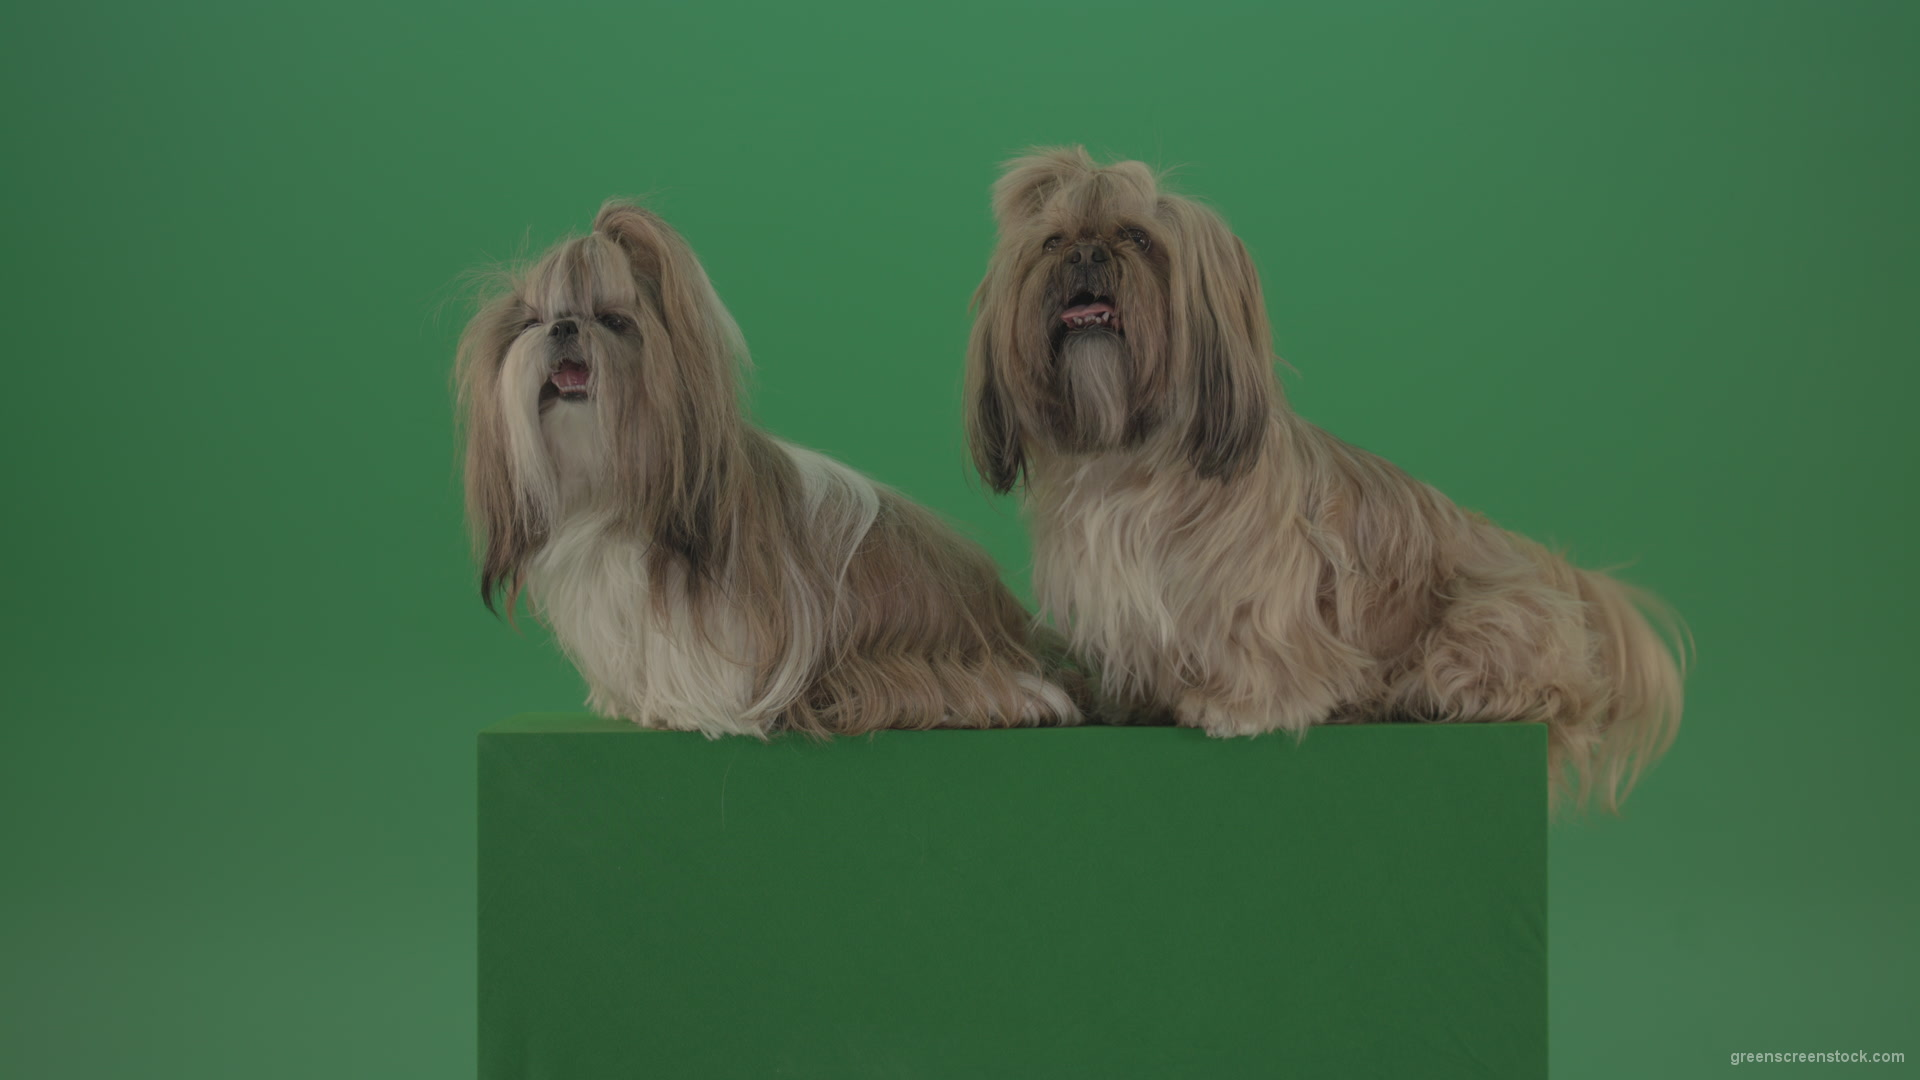 Awards-winners-Shih-tzu-fashion-luxury-expensive-dog-in-side-view-isolated-on-green-screen_001 Green Screen Stock